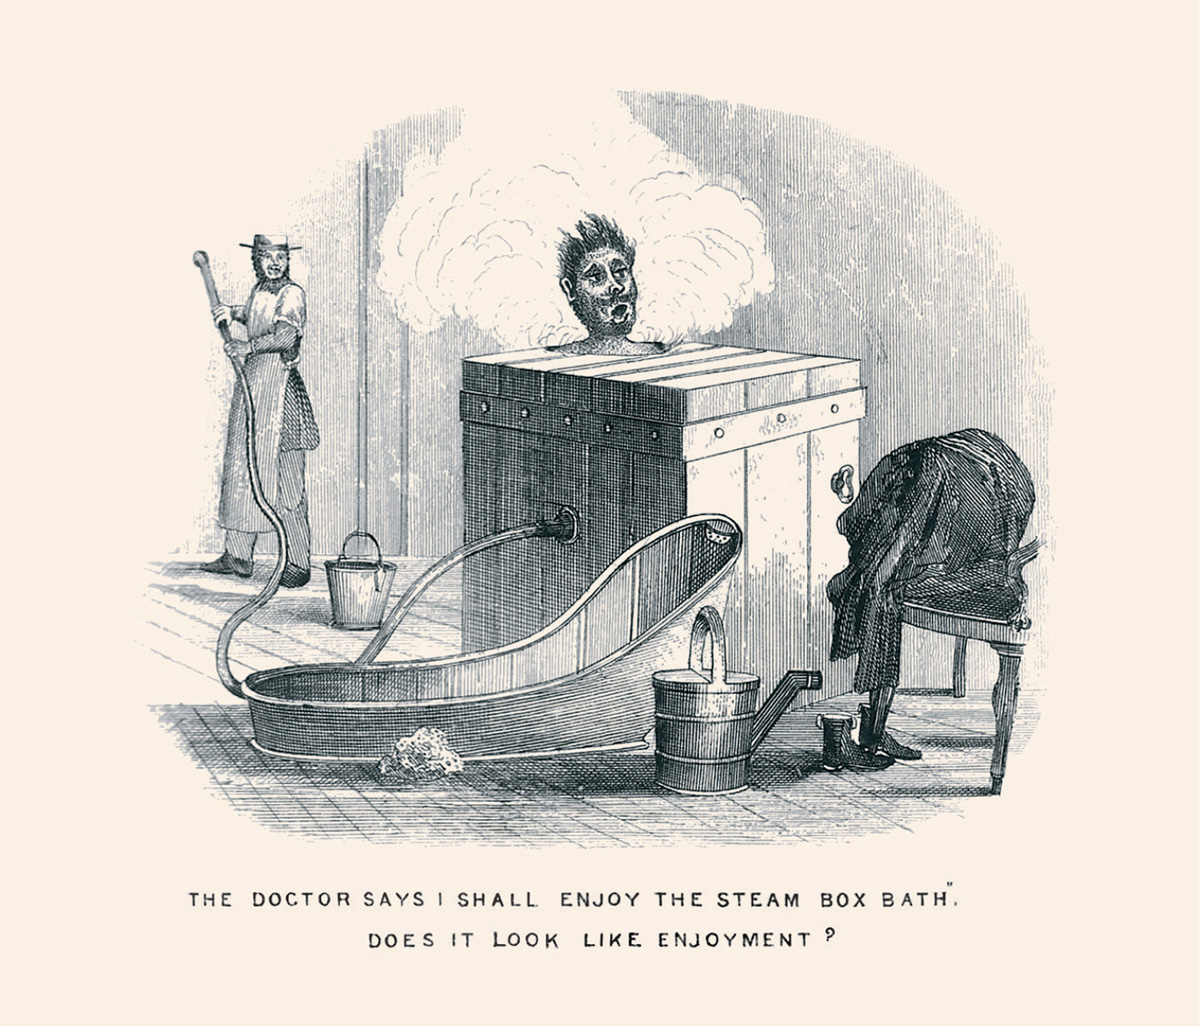 A drawing from the eighteen sixty nine British book “The Water Cure Illustrated of an unhappy-looking man enclosed in a steam machine. The caption reads: “The doctor says I shall enjoy the steam box bath Does it look like enjoyment?.”